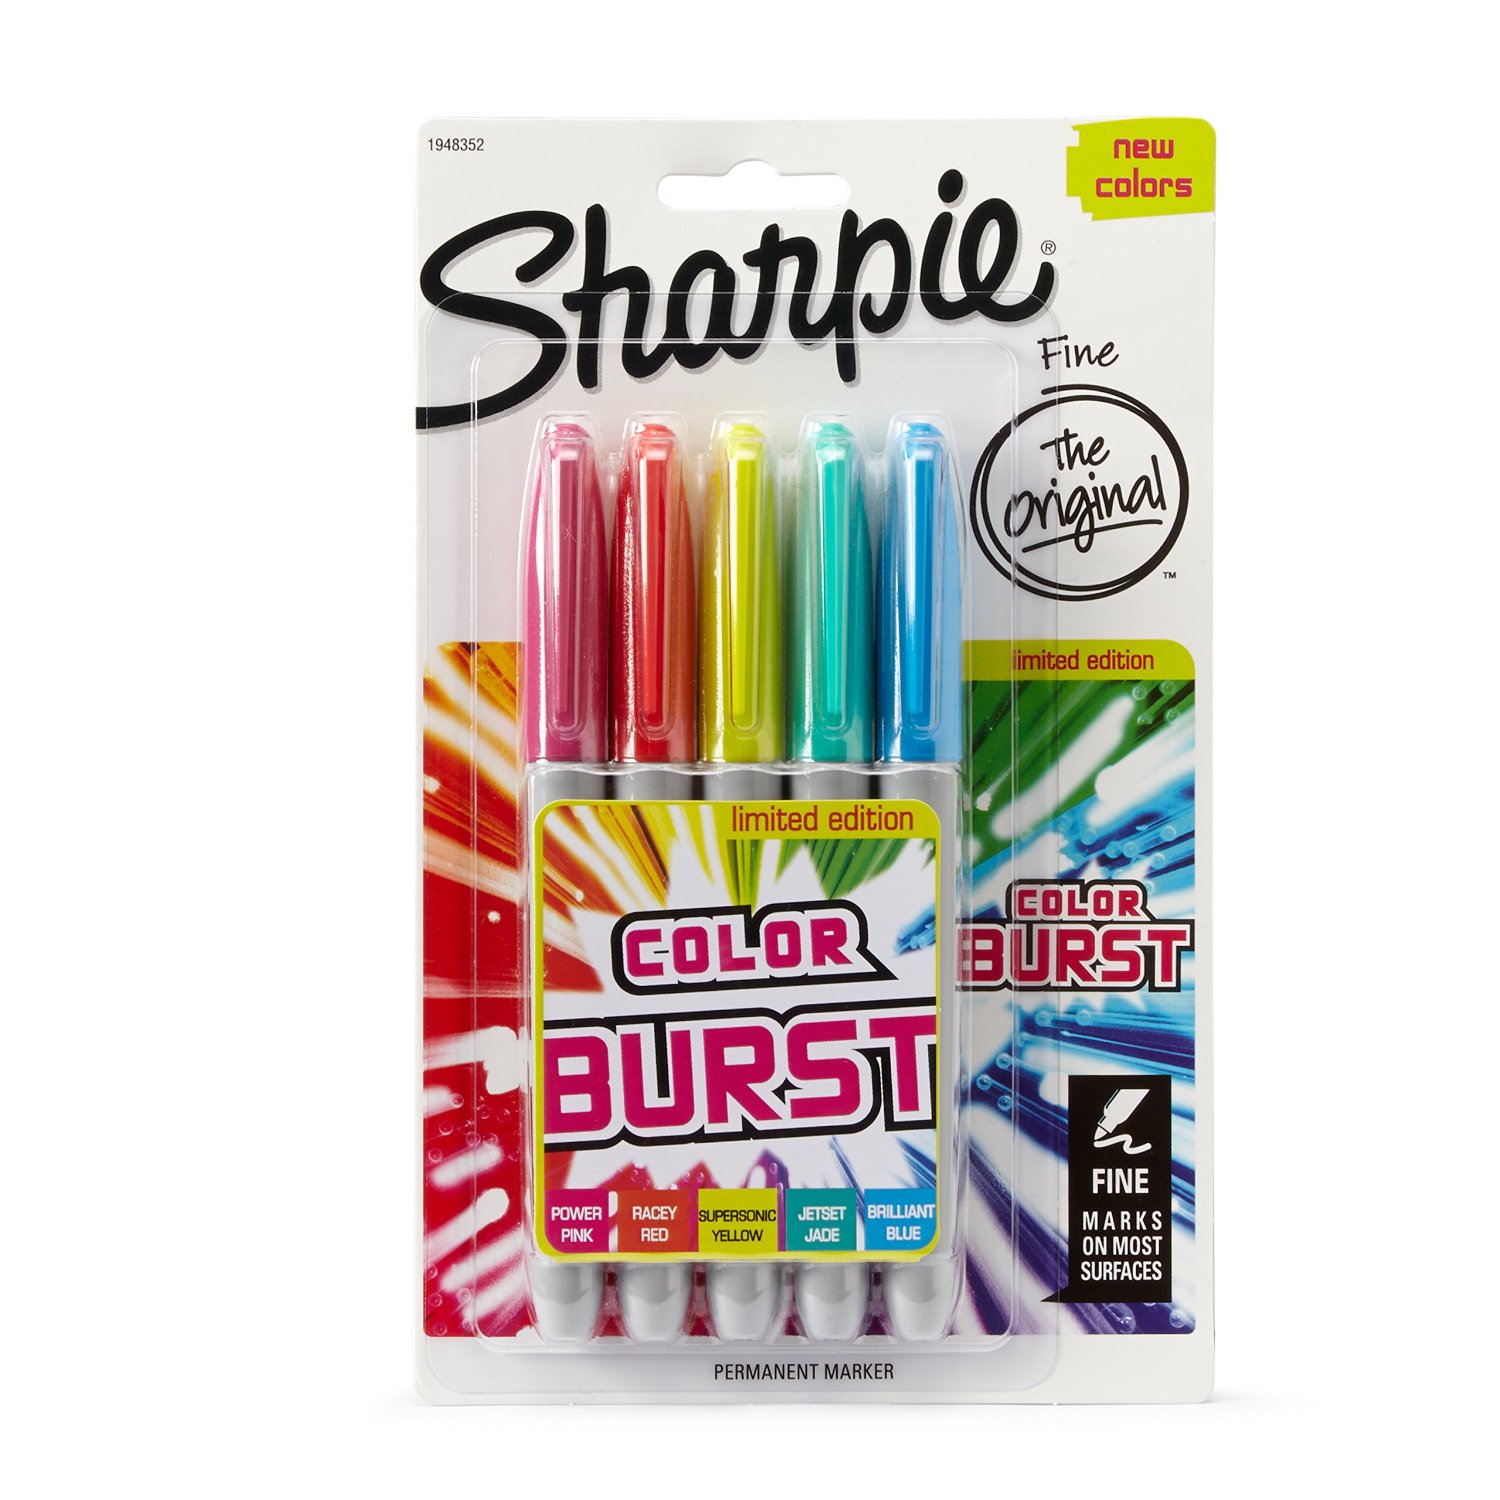 Sharpie Color Burst Permanent Markers, Fine Point, Assorted, 5-Pack – Just $3.97!